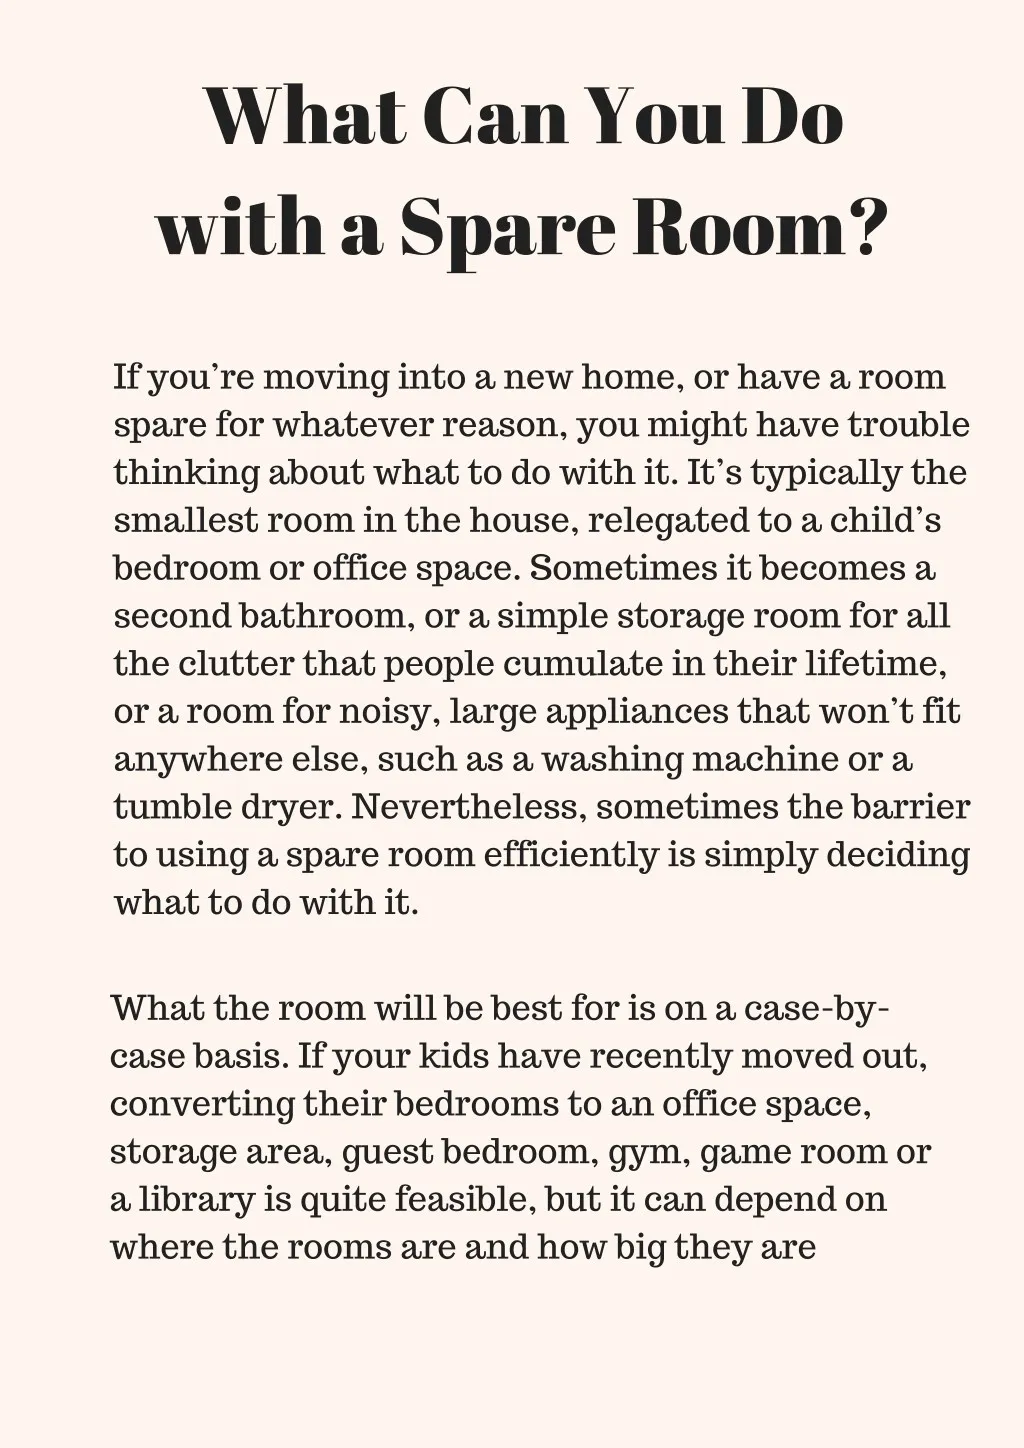 what can you do with a spare room